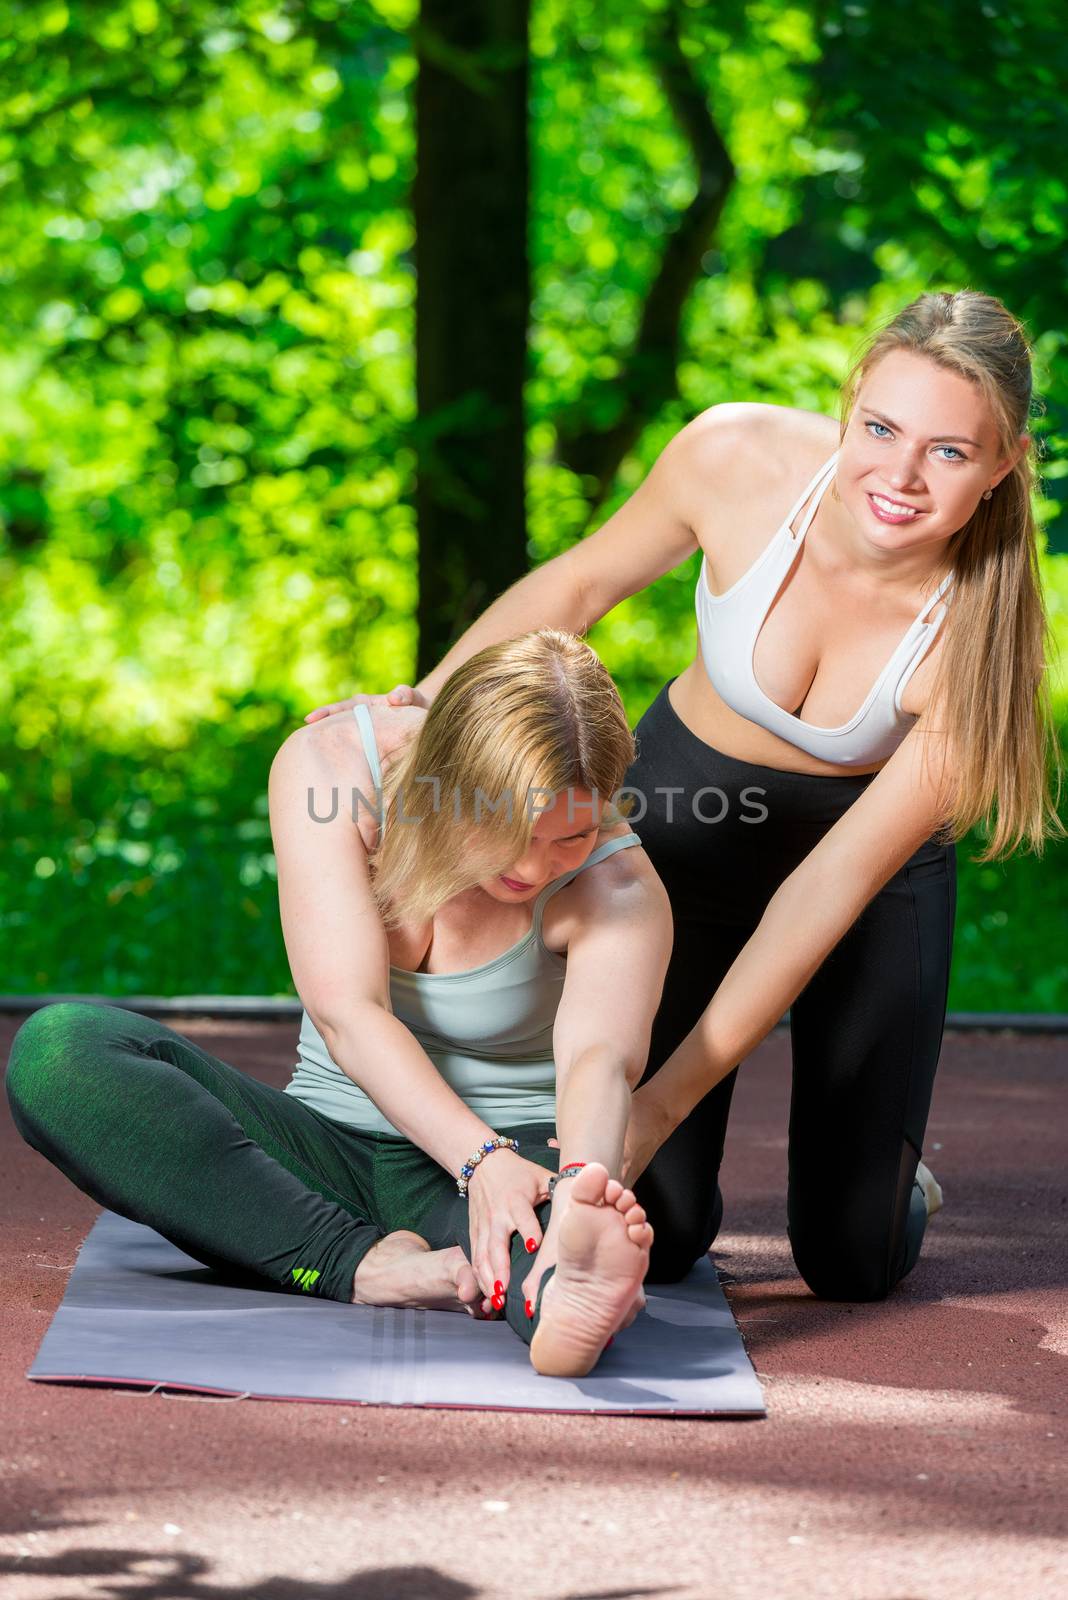 in the park, a yoga trainer helps a woman to do stretching exerc by kosmsos111